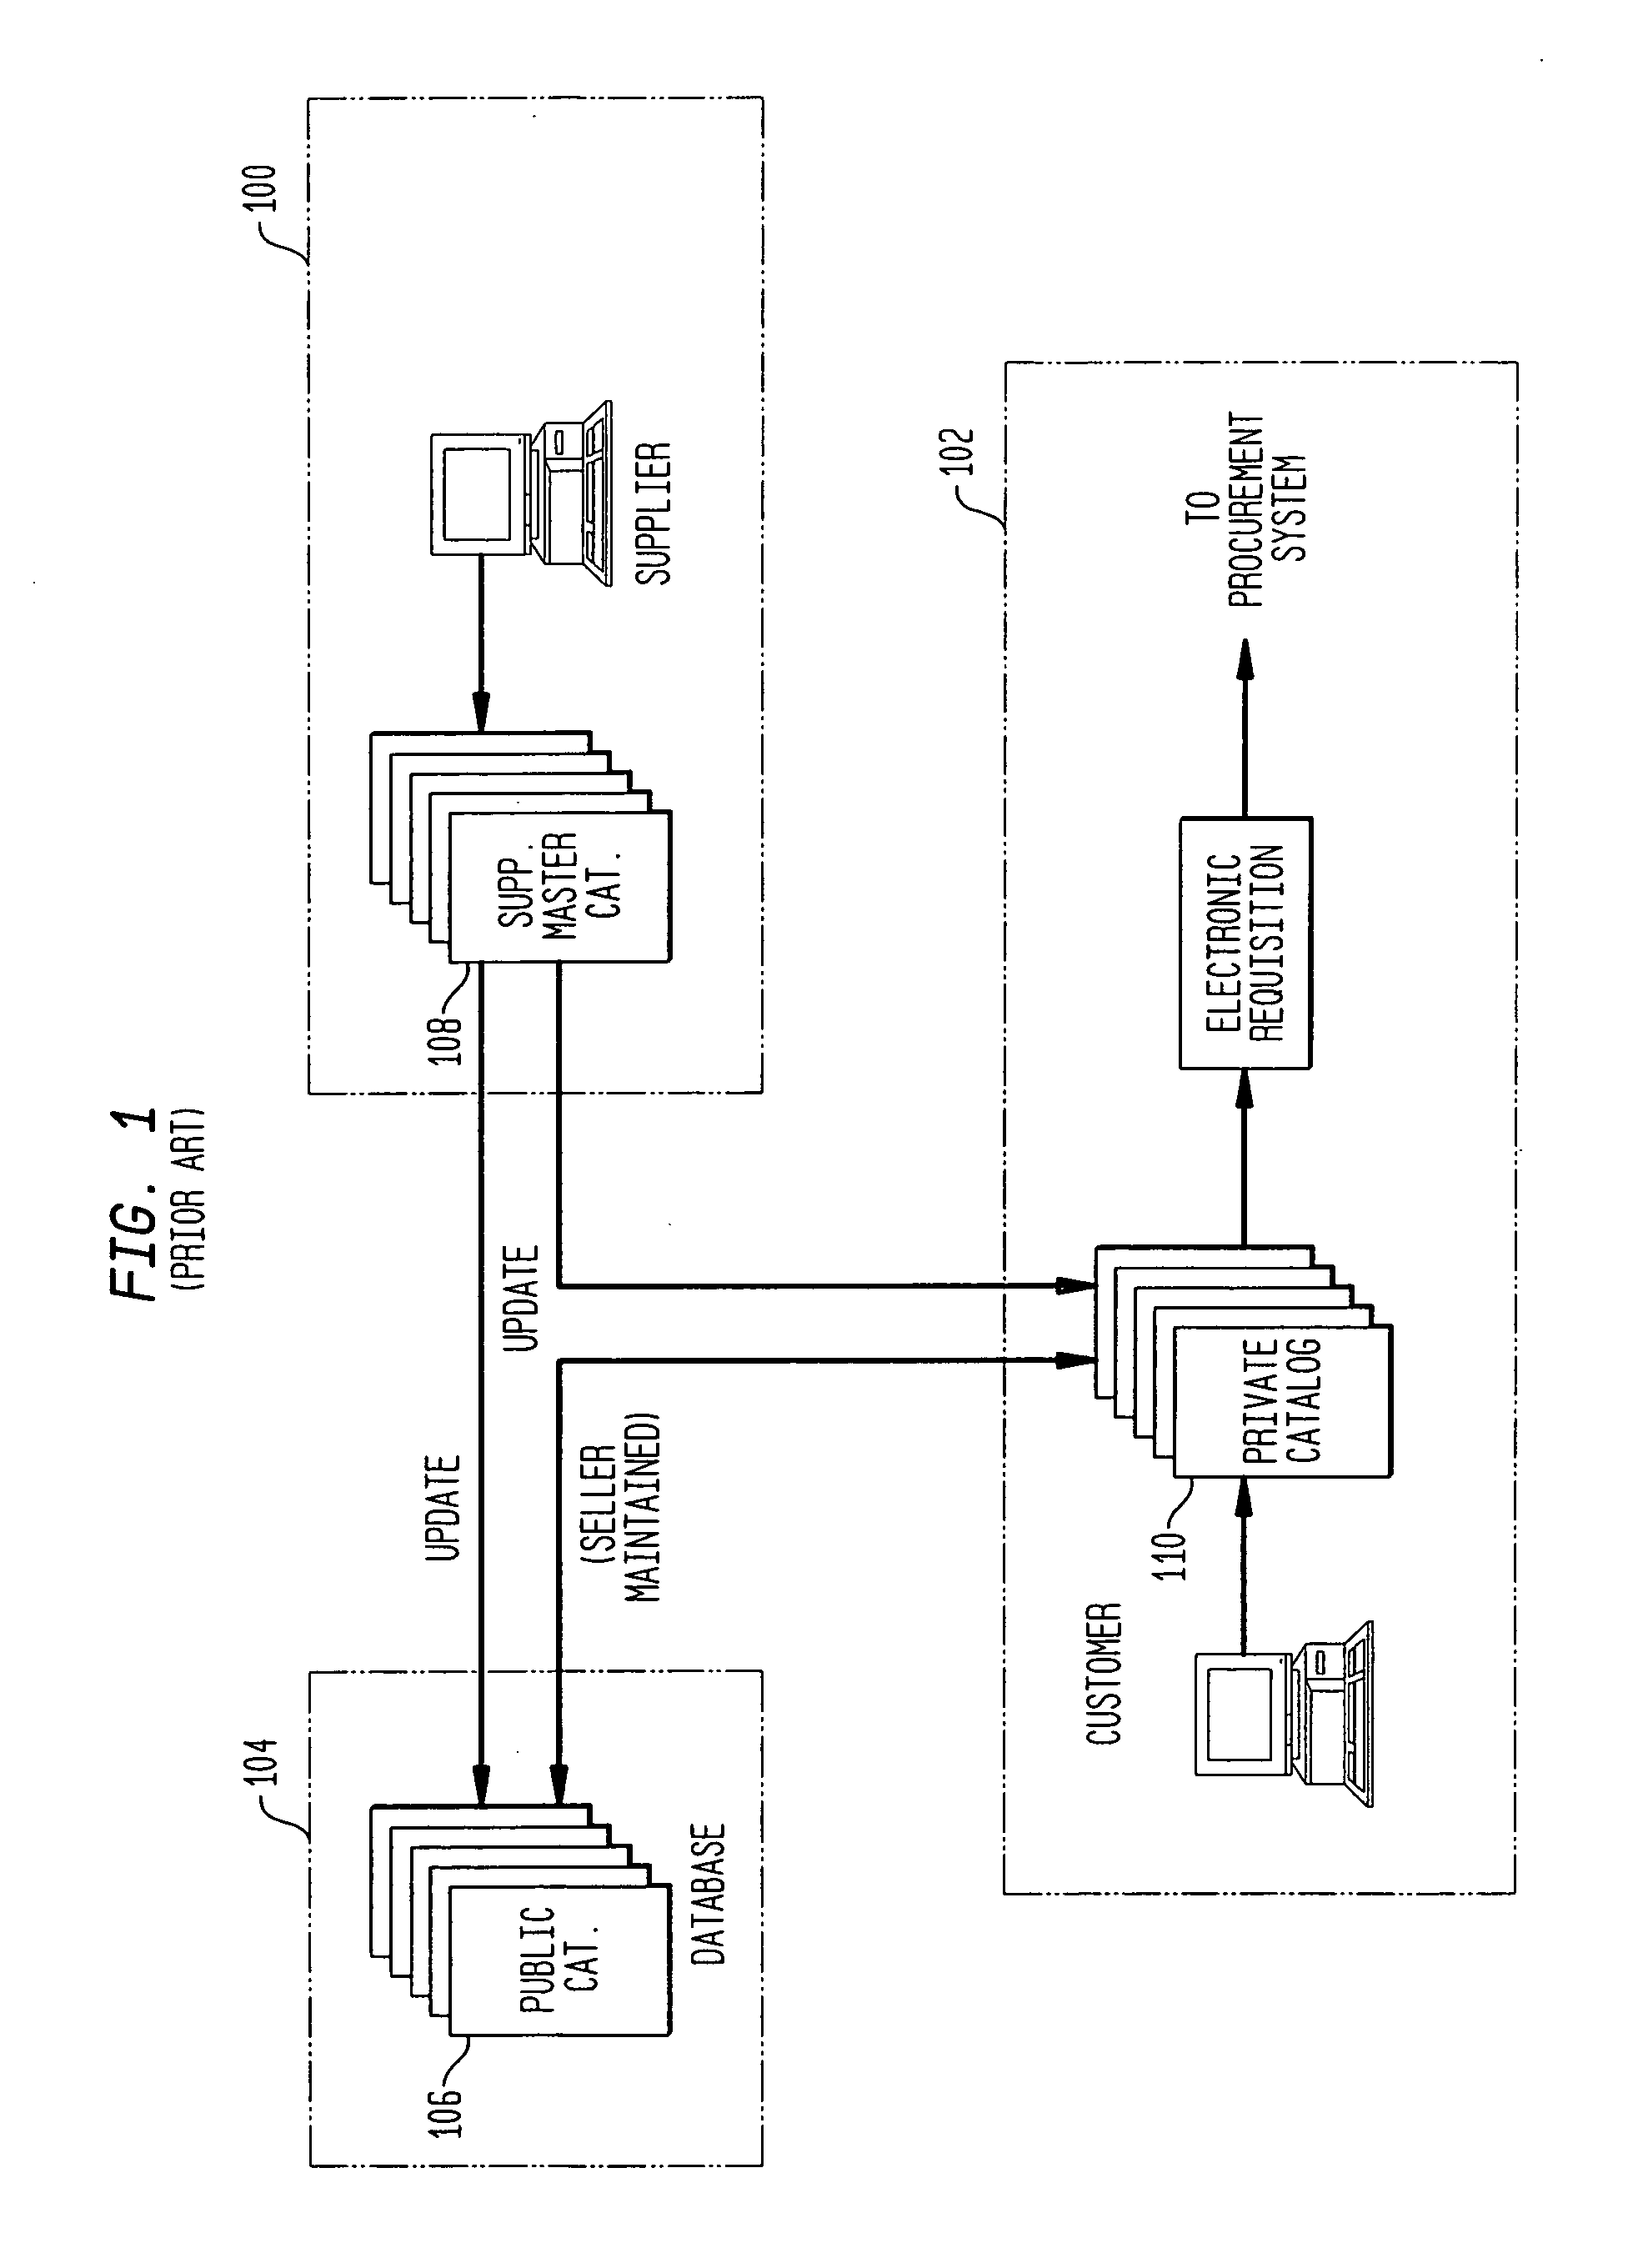 System and method for ordering items using a electronic catalog via the internet